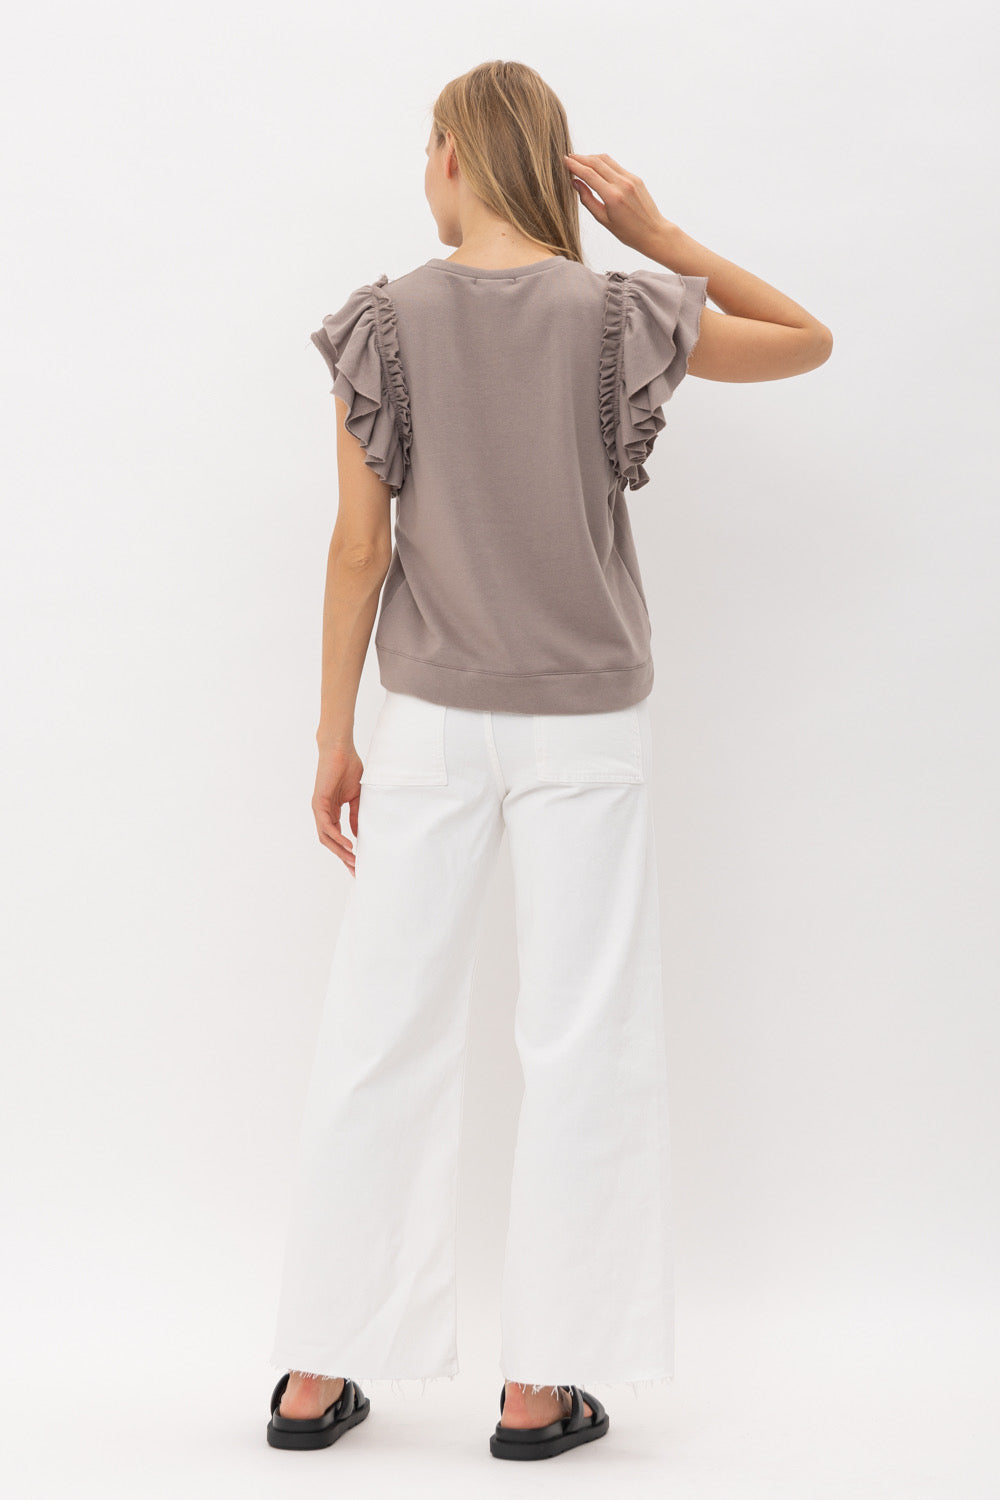 French Terry Ruffle Shoulder Sleeveless Top 3 colors Available